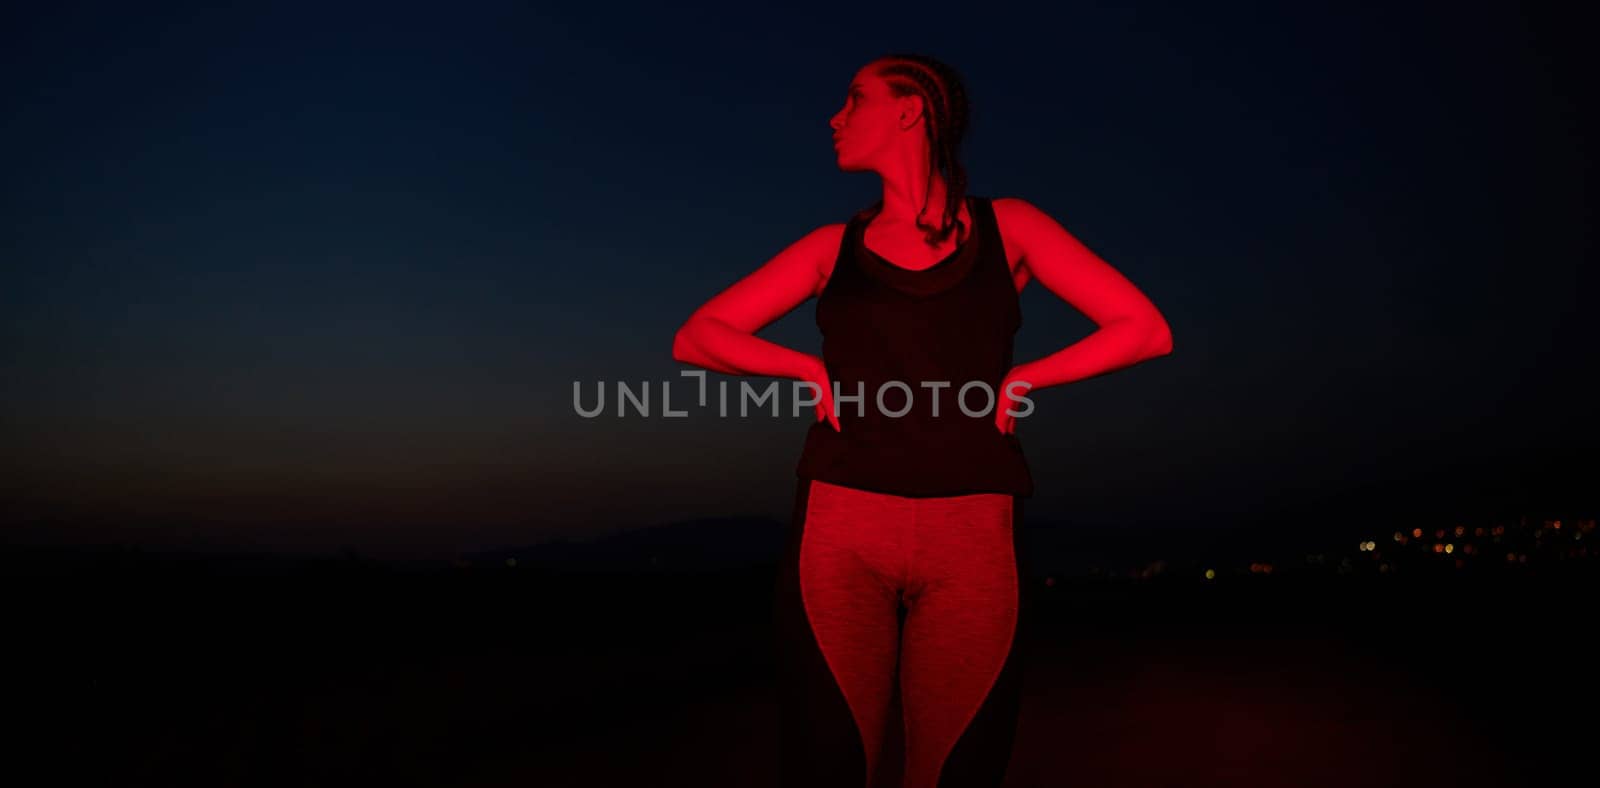 Athlete Strikes a Pose in Red-Lit Nighttime Glow by dotshock